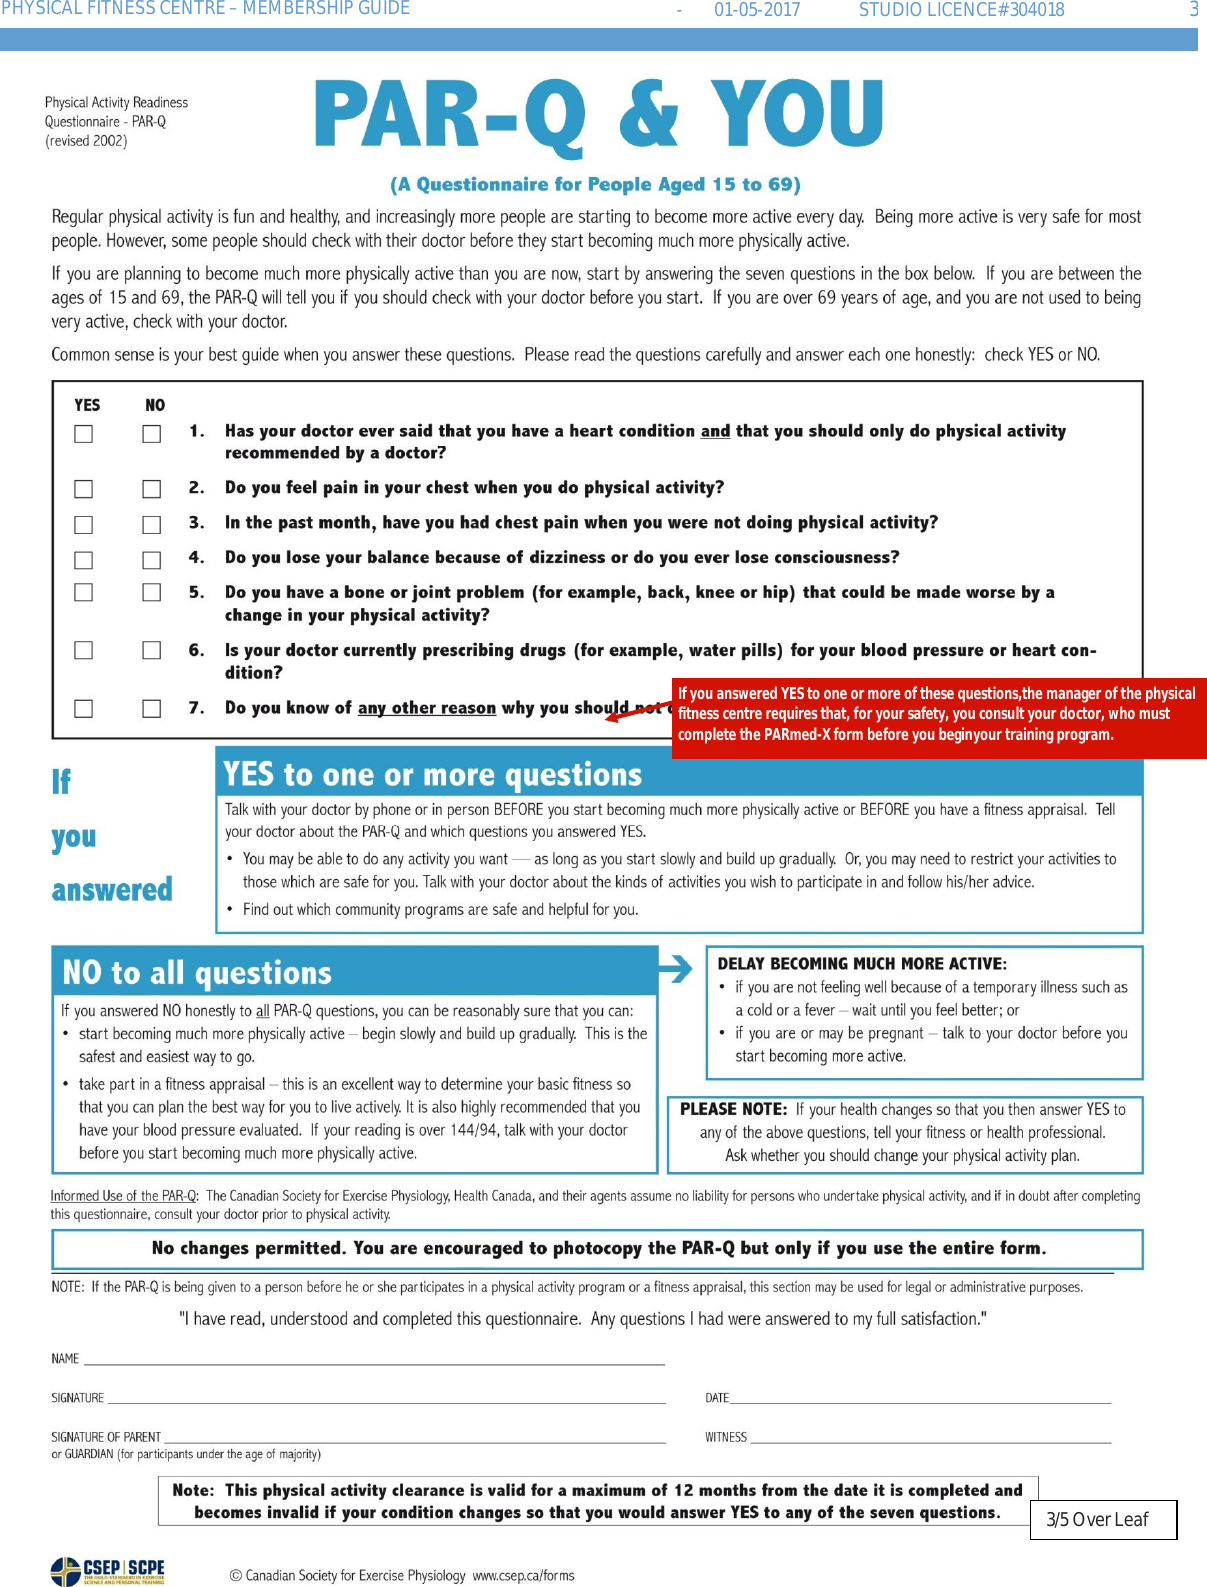 Page 3 of 6 - Registration Guide English